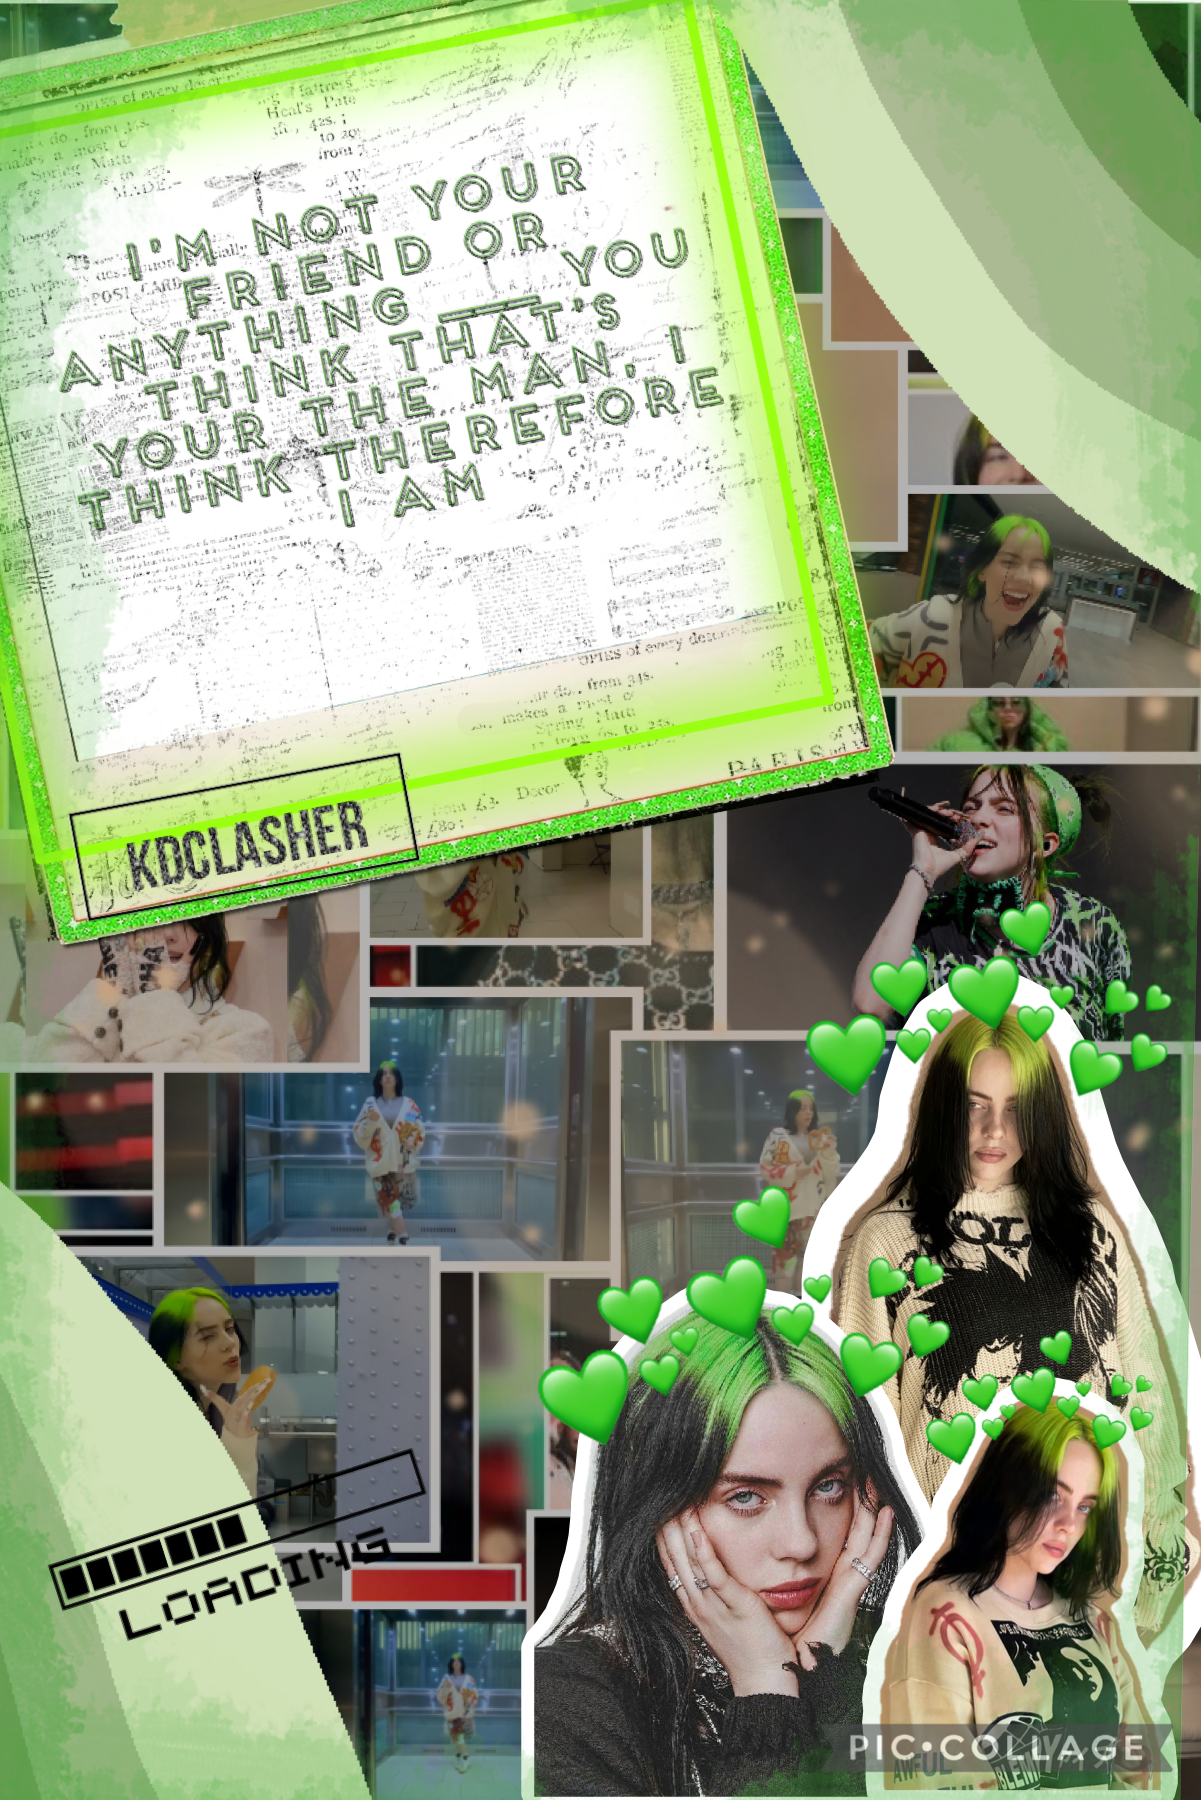 Billie Eilish~Therefore I Am! 🍀 my favorite song rn 🎉